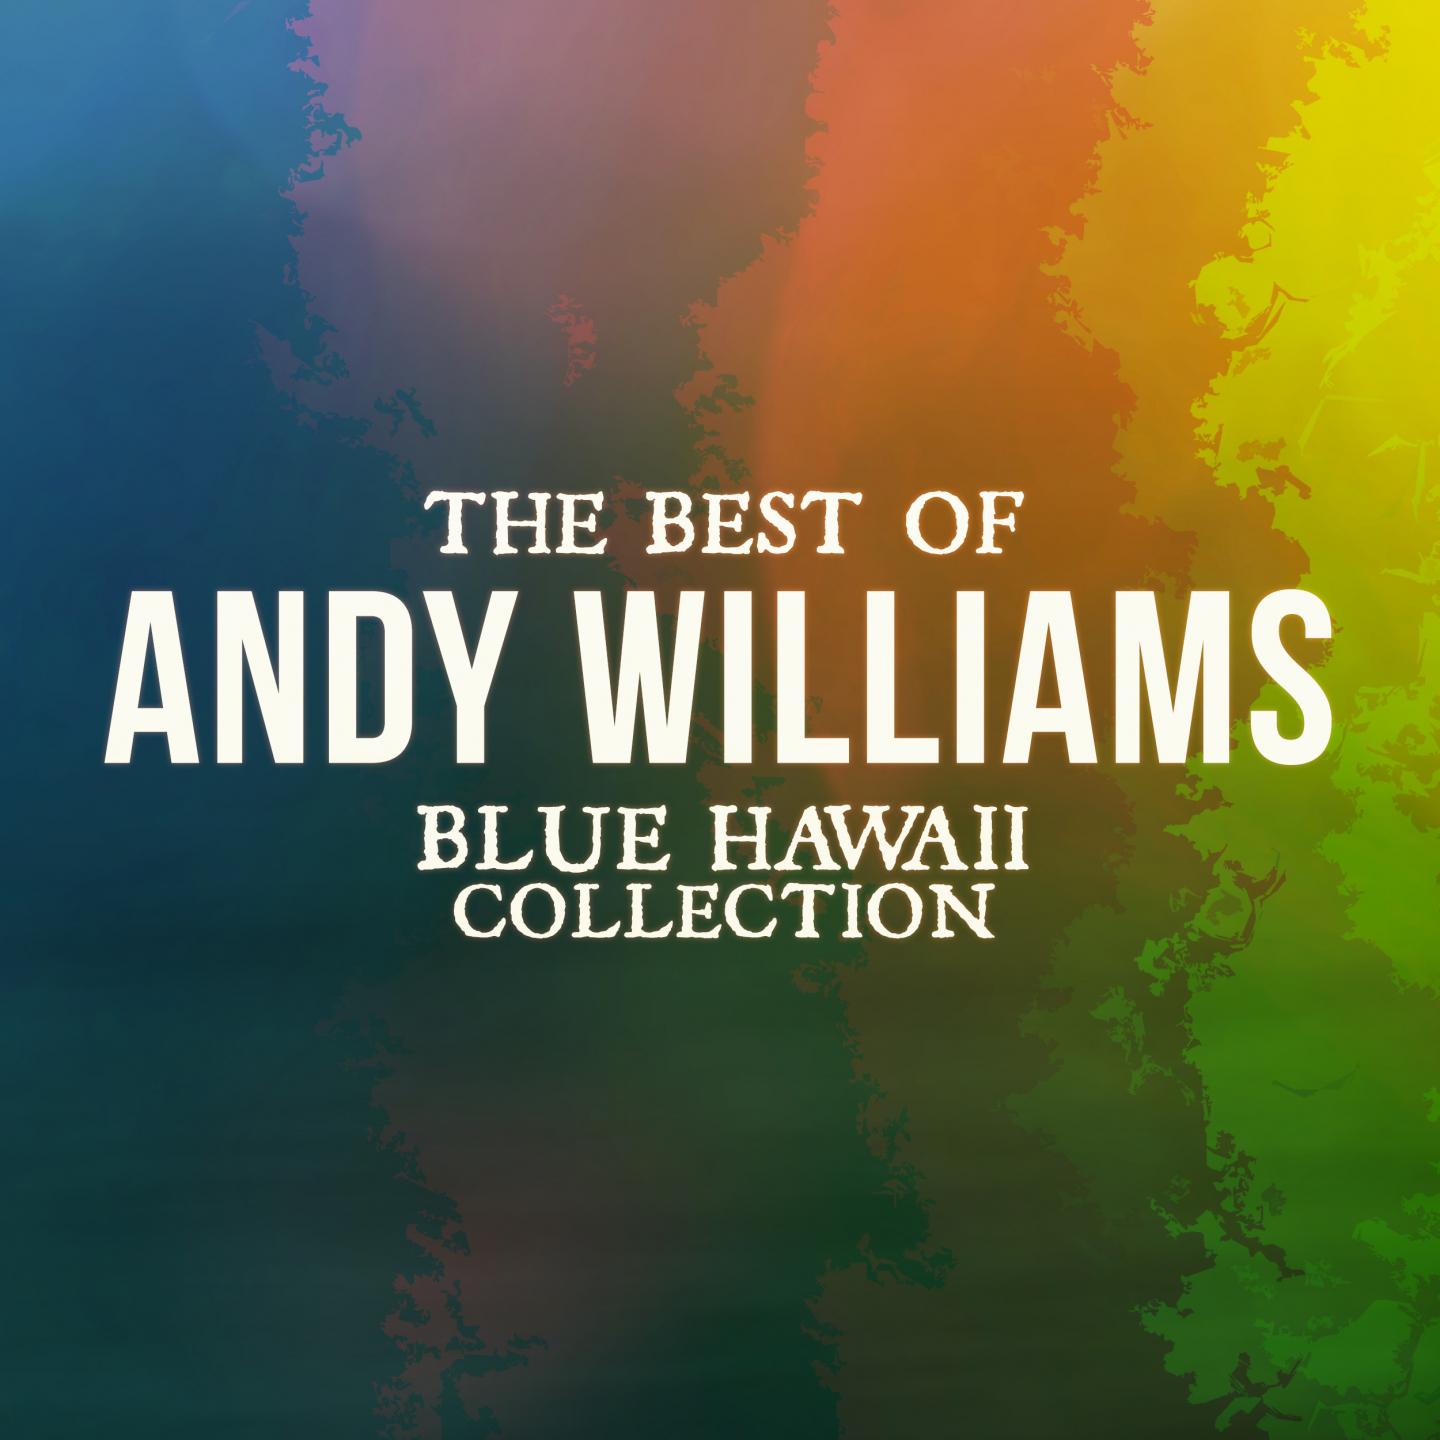 The Best Of Andy Williams (Blue Hawaii Collection)